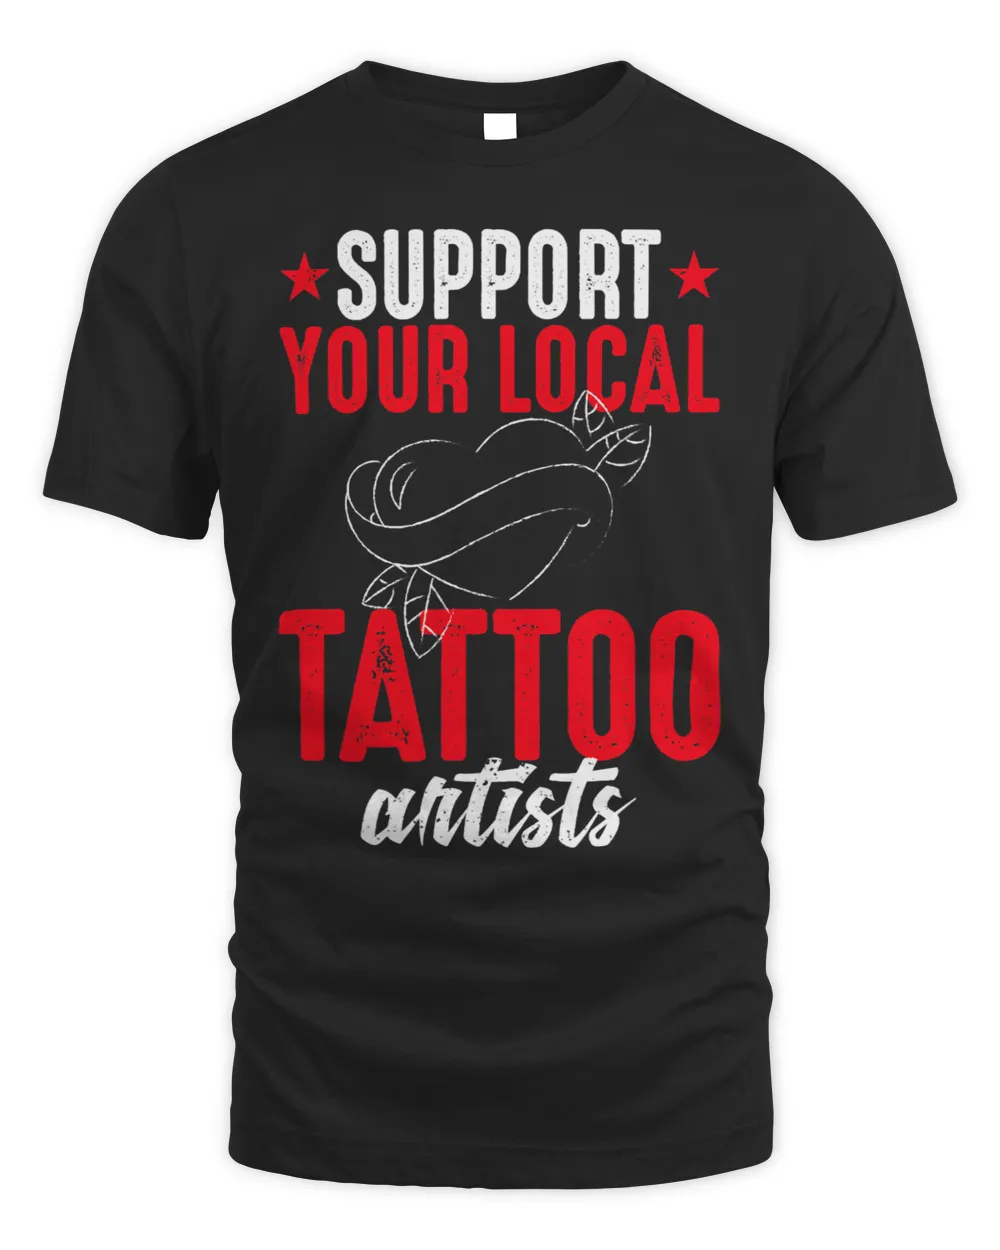 Support Local Tattoo Artists Design For Artists